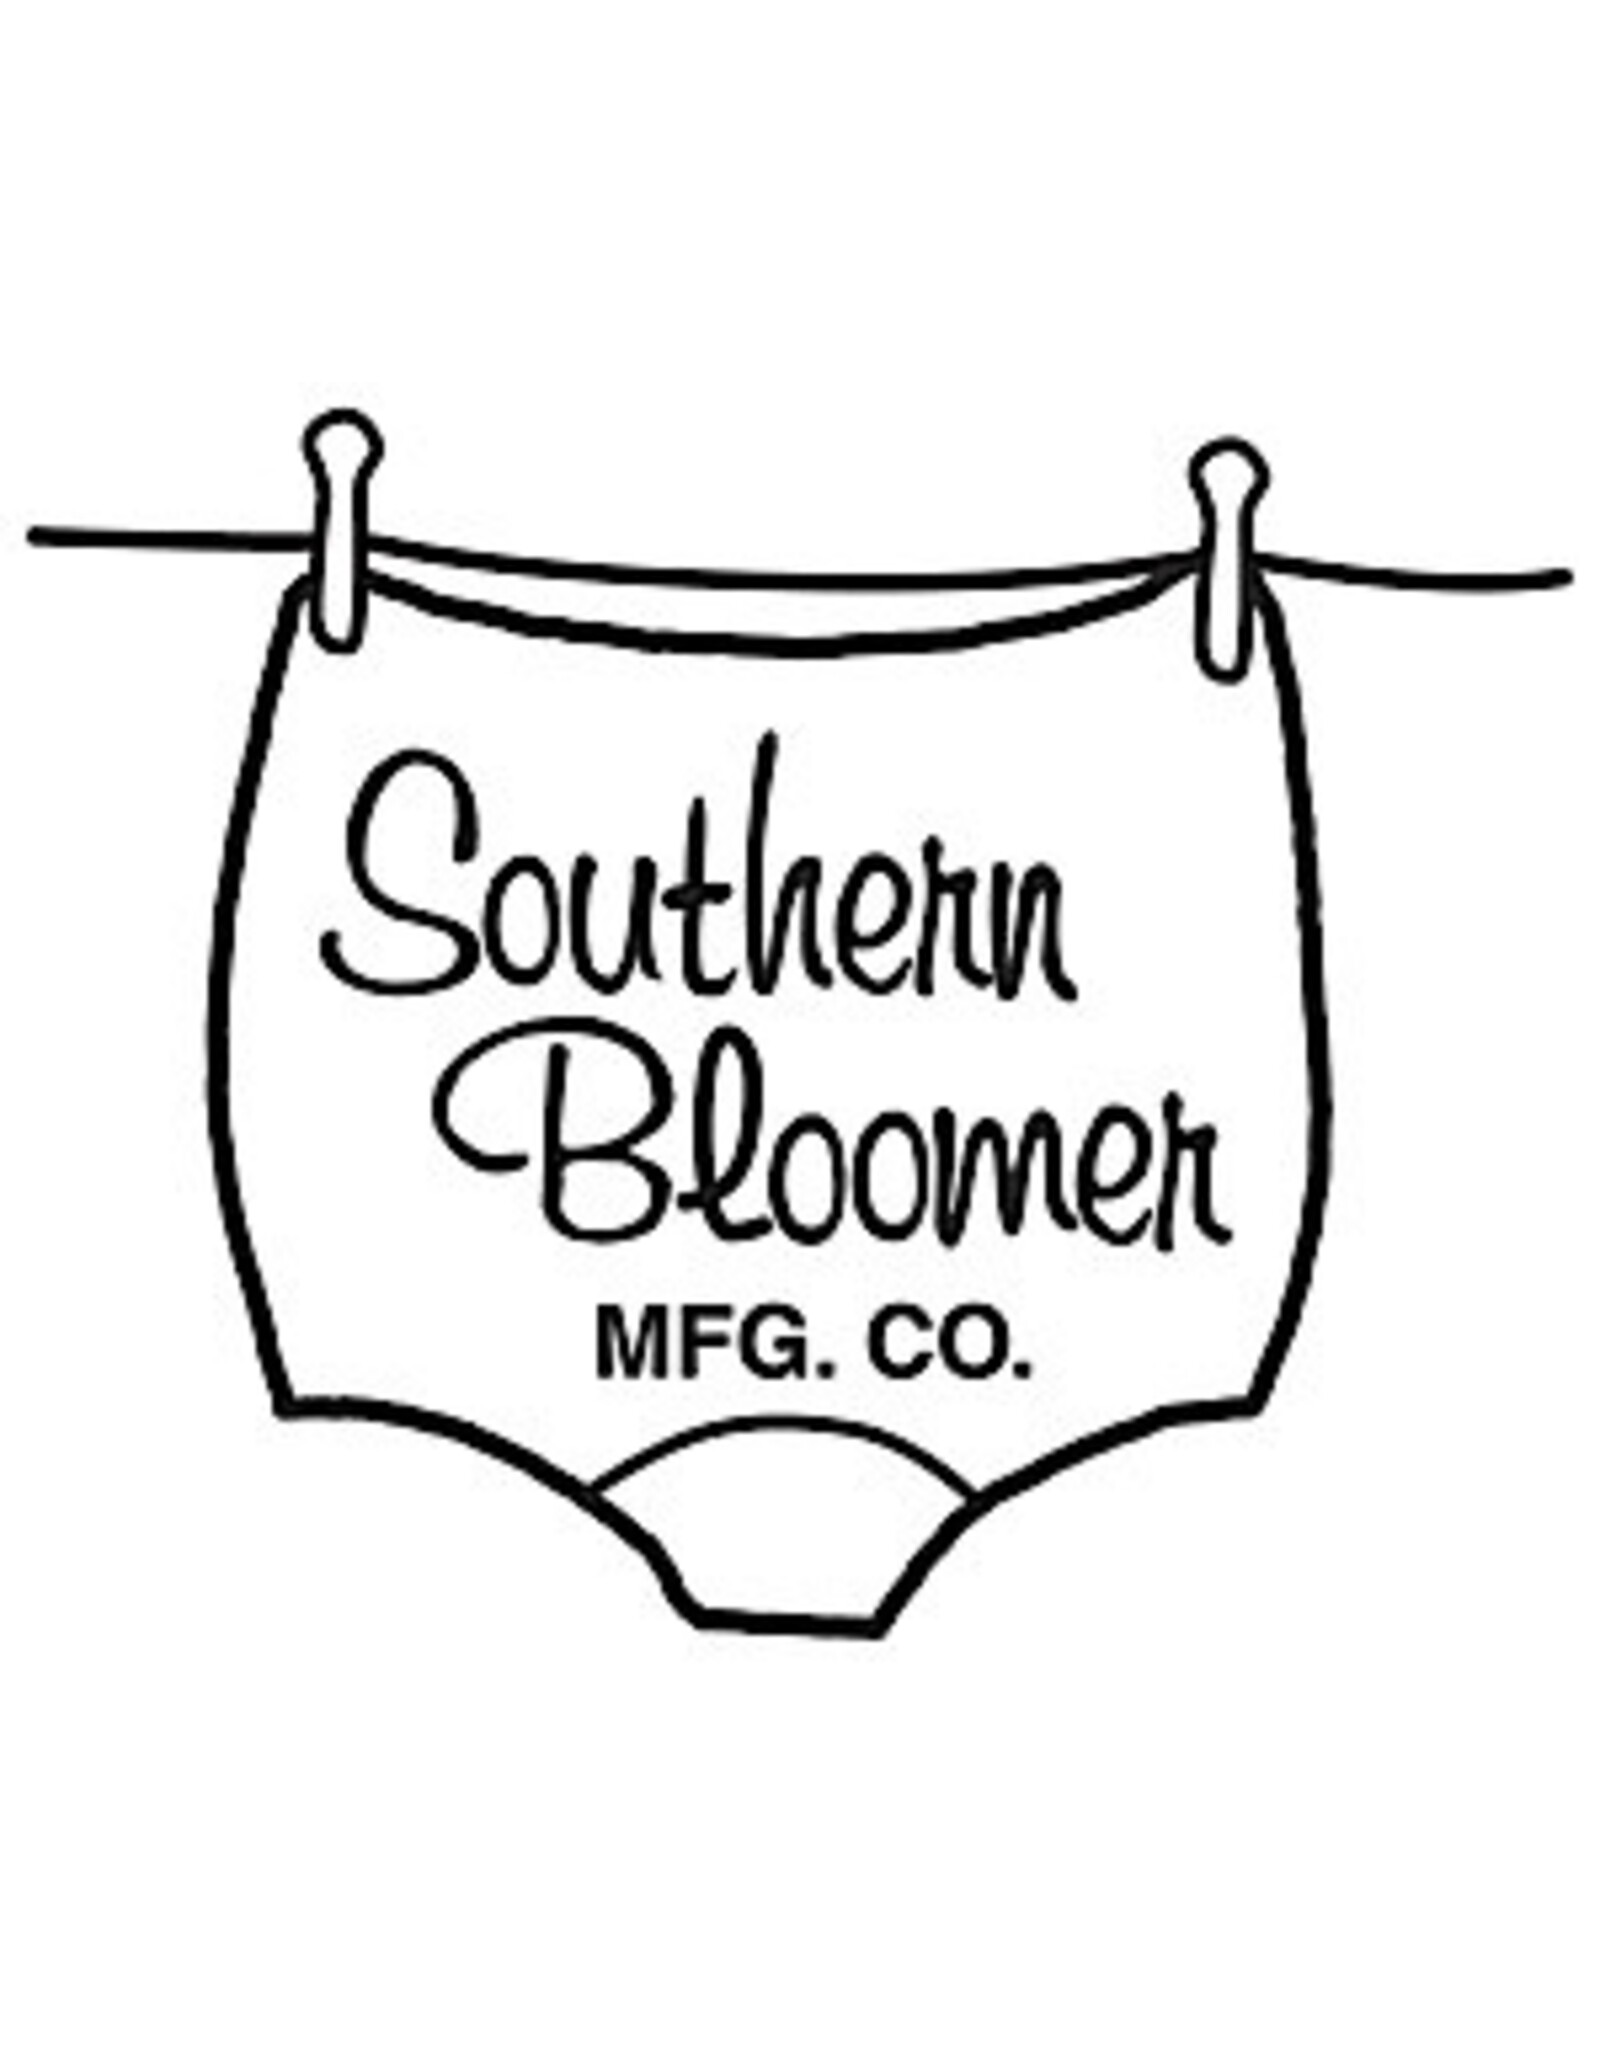 Southern Southern Bloomer Cleaning Patches - 6mm -1000 Count